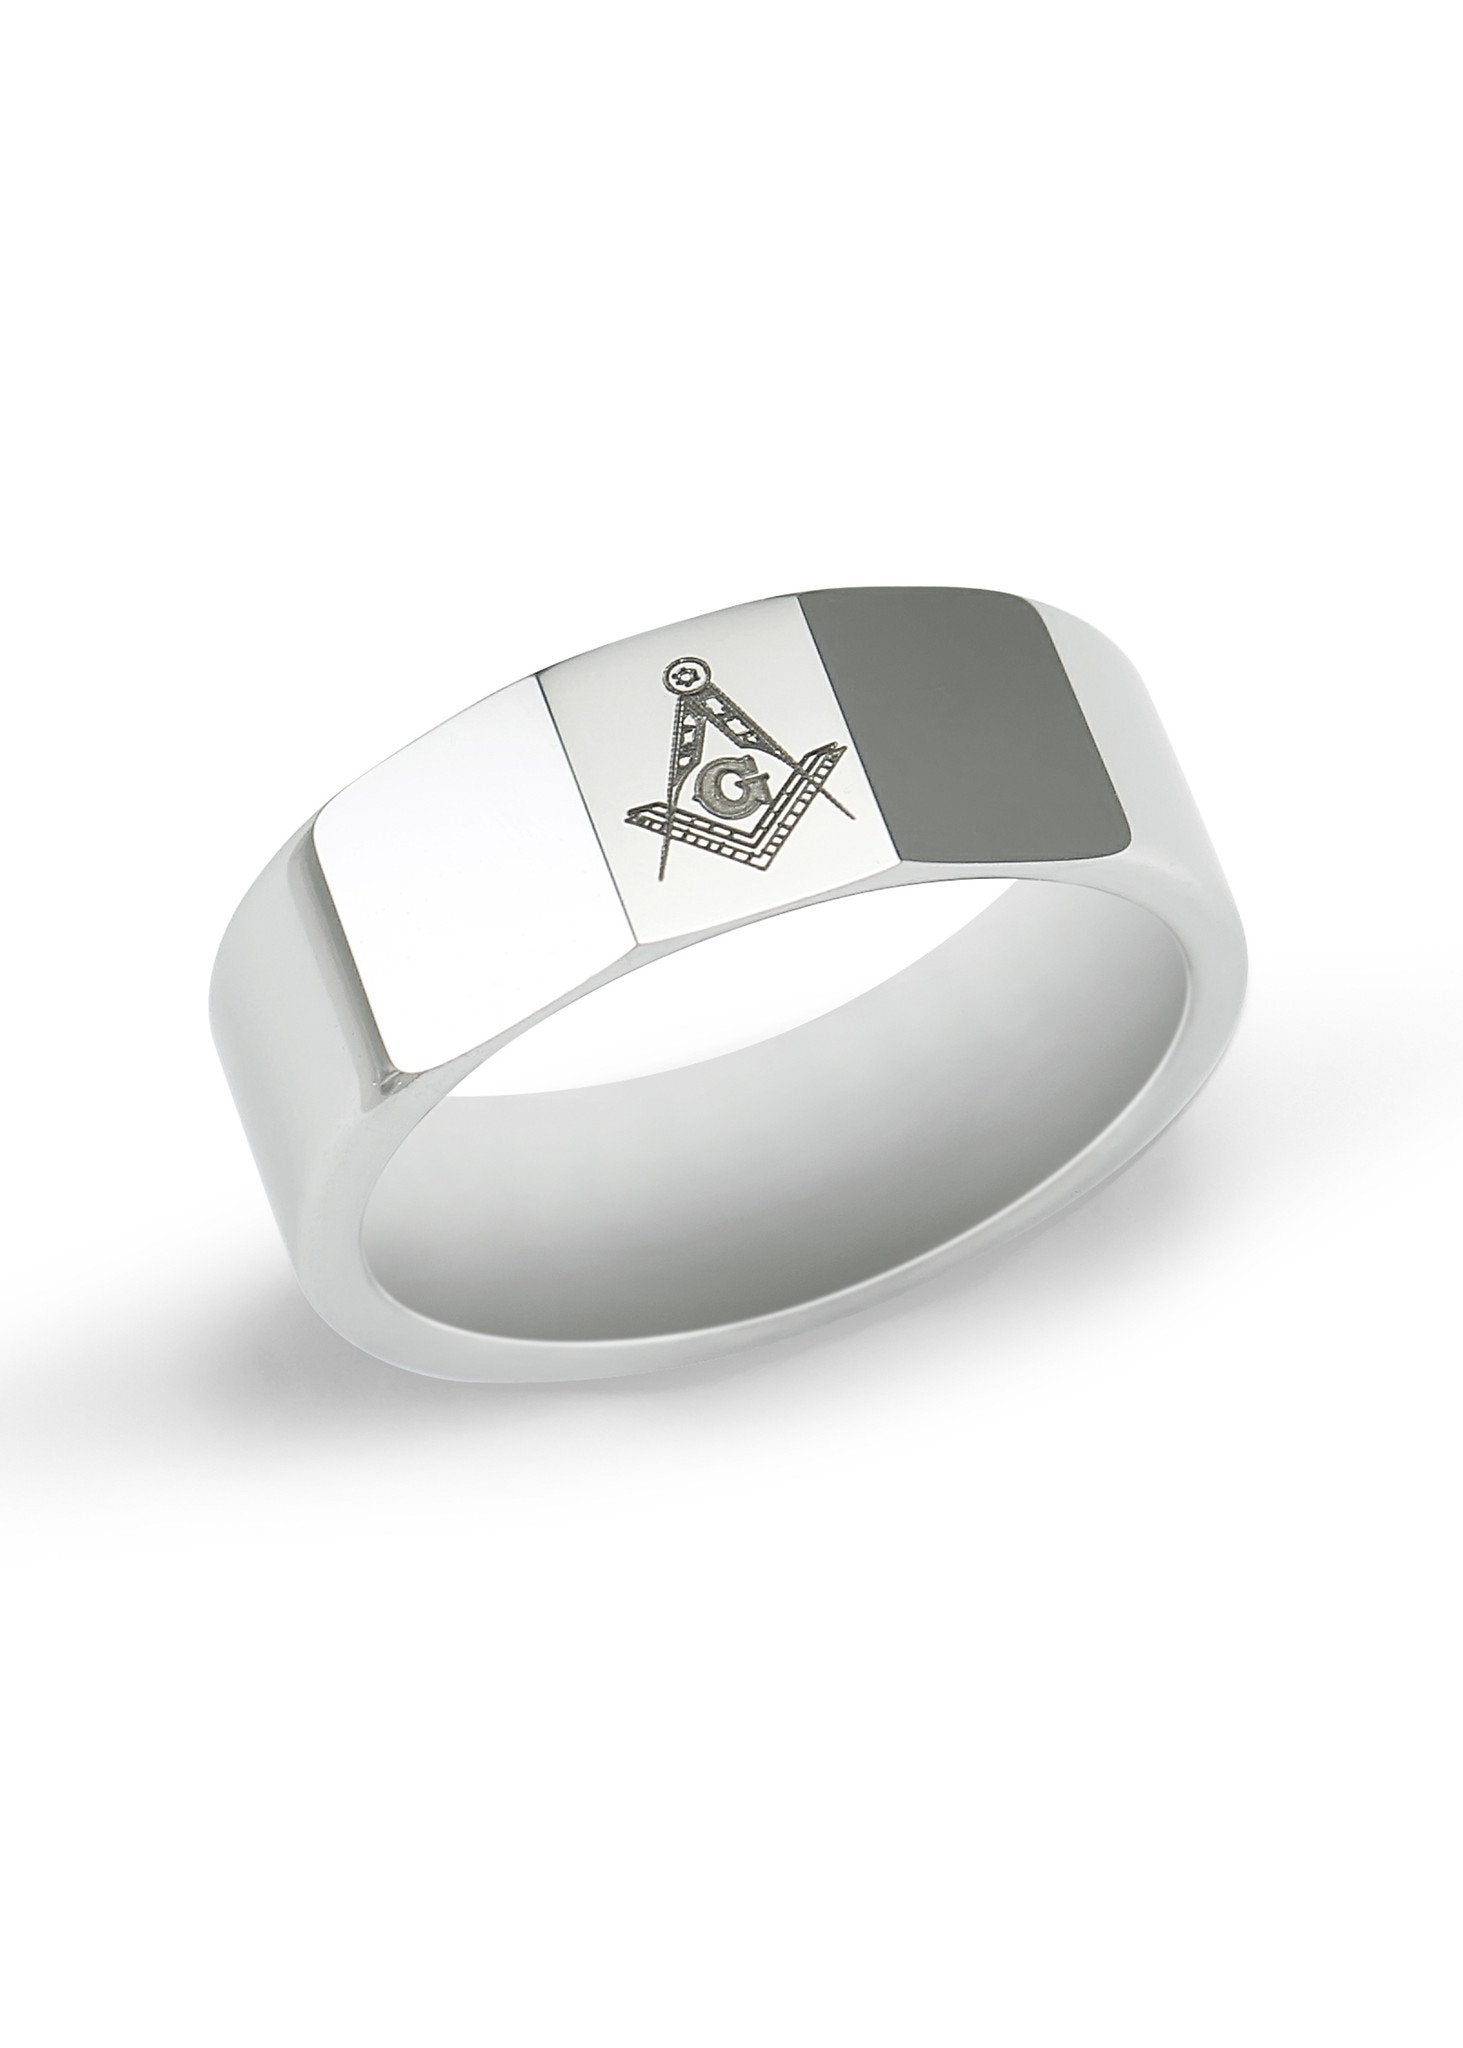 Past Master Ring in Gold ~ style 041pm - ProLine Designs